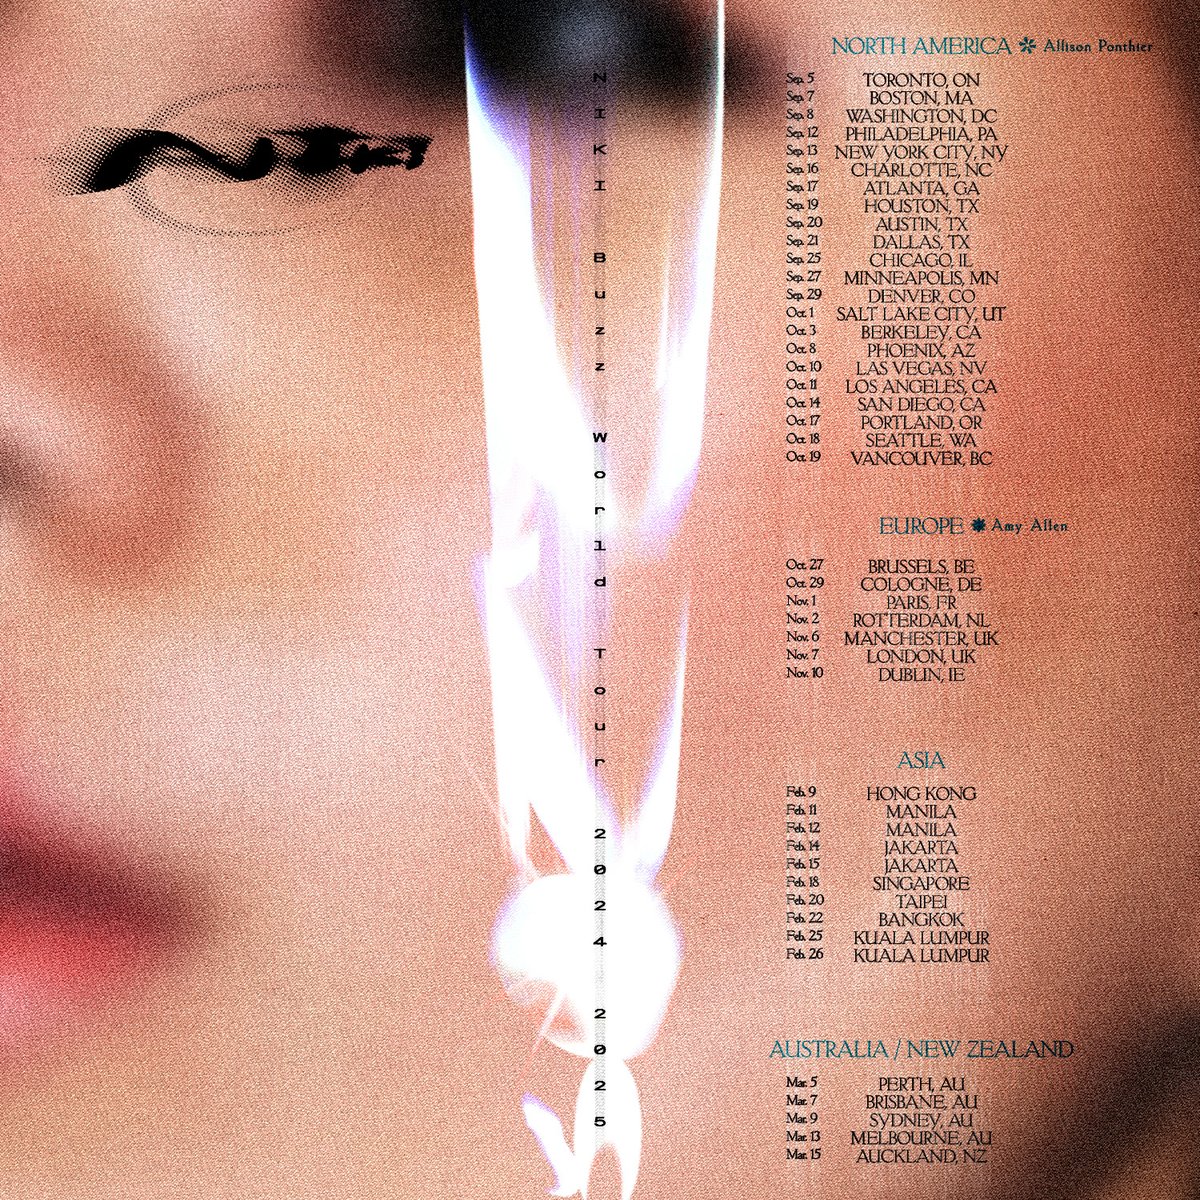 NIKI BUZZ WORLD TOUR ⚡️ North America + Europe pre-sale begins tomorrow 10am local time. RSVP at nikizefanya.com for the pre-sale code!